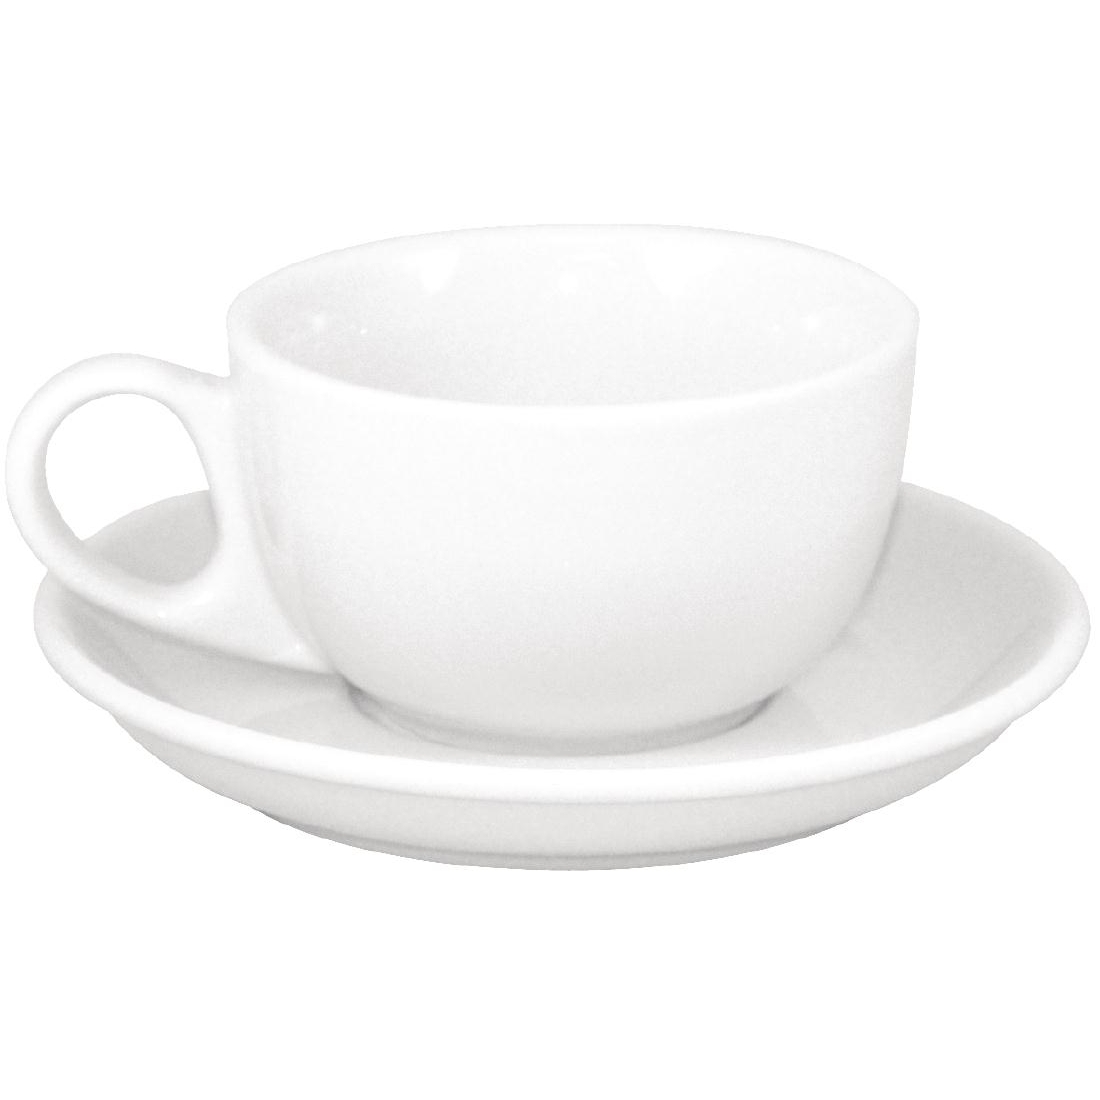 SPECIAL OFFER Athena Hotelware Cappuccino Cups and Saucers